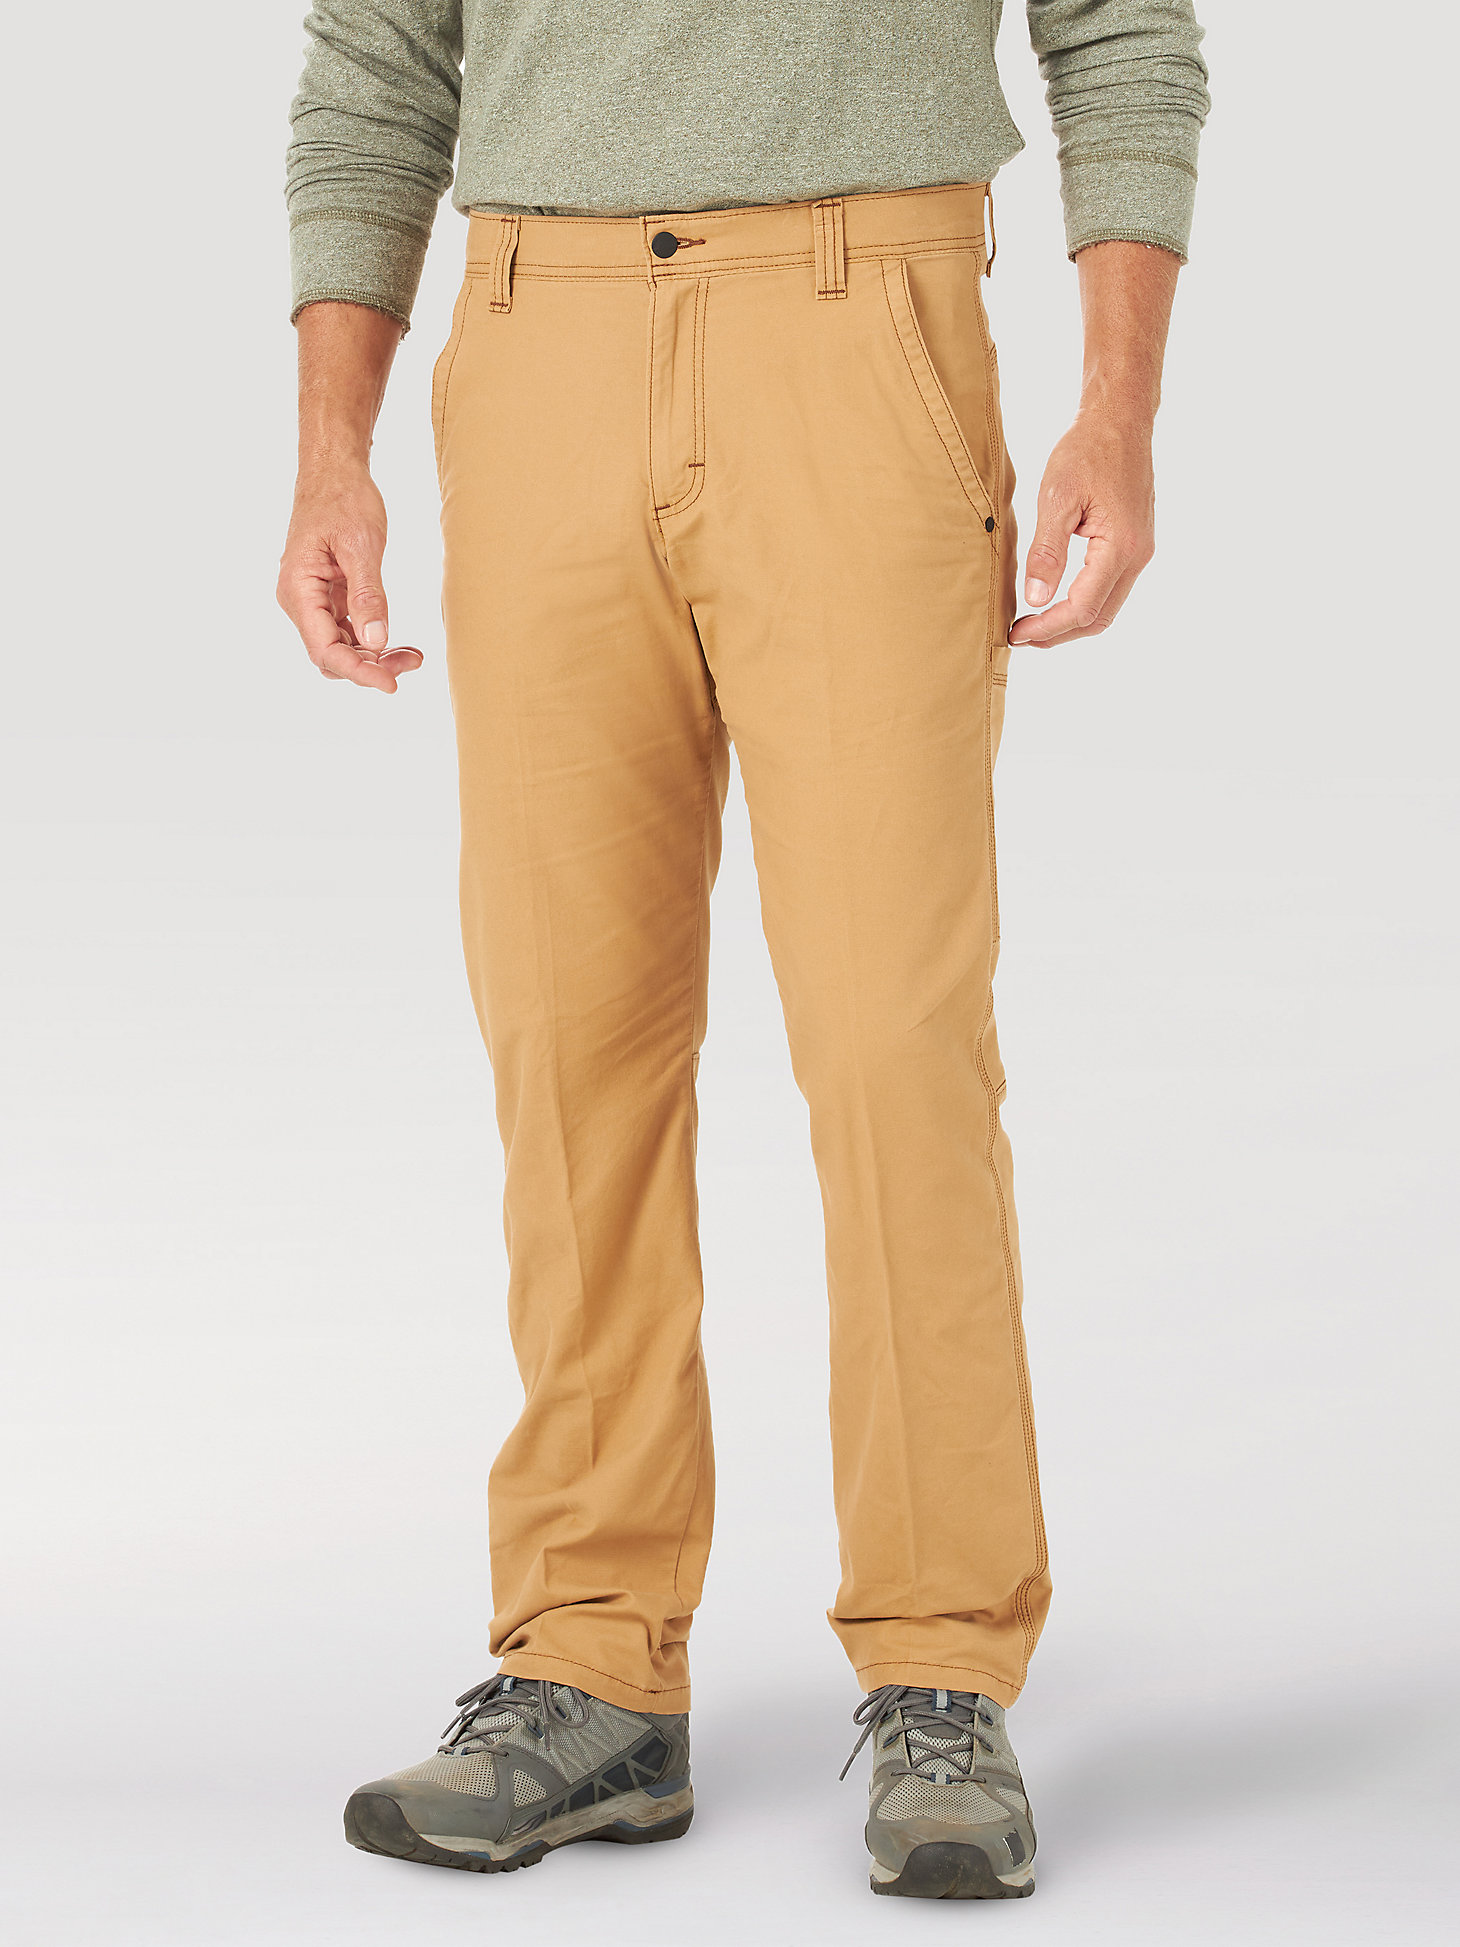 Men's Wrangler® Outdoor Rugged Utility Pant in Bistre main view